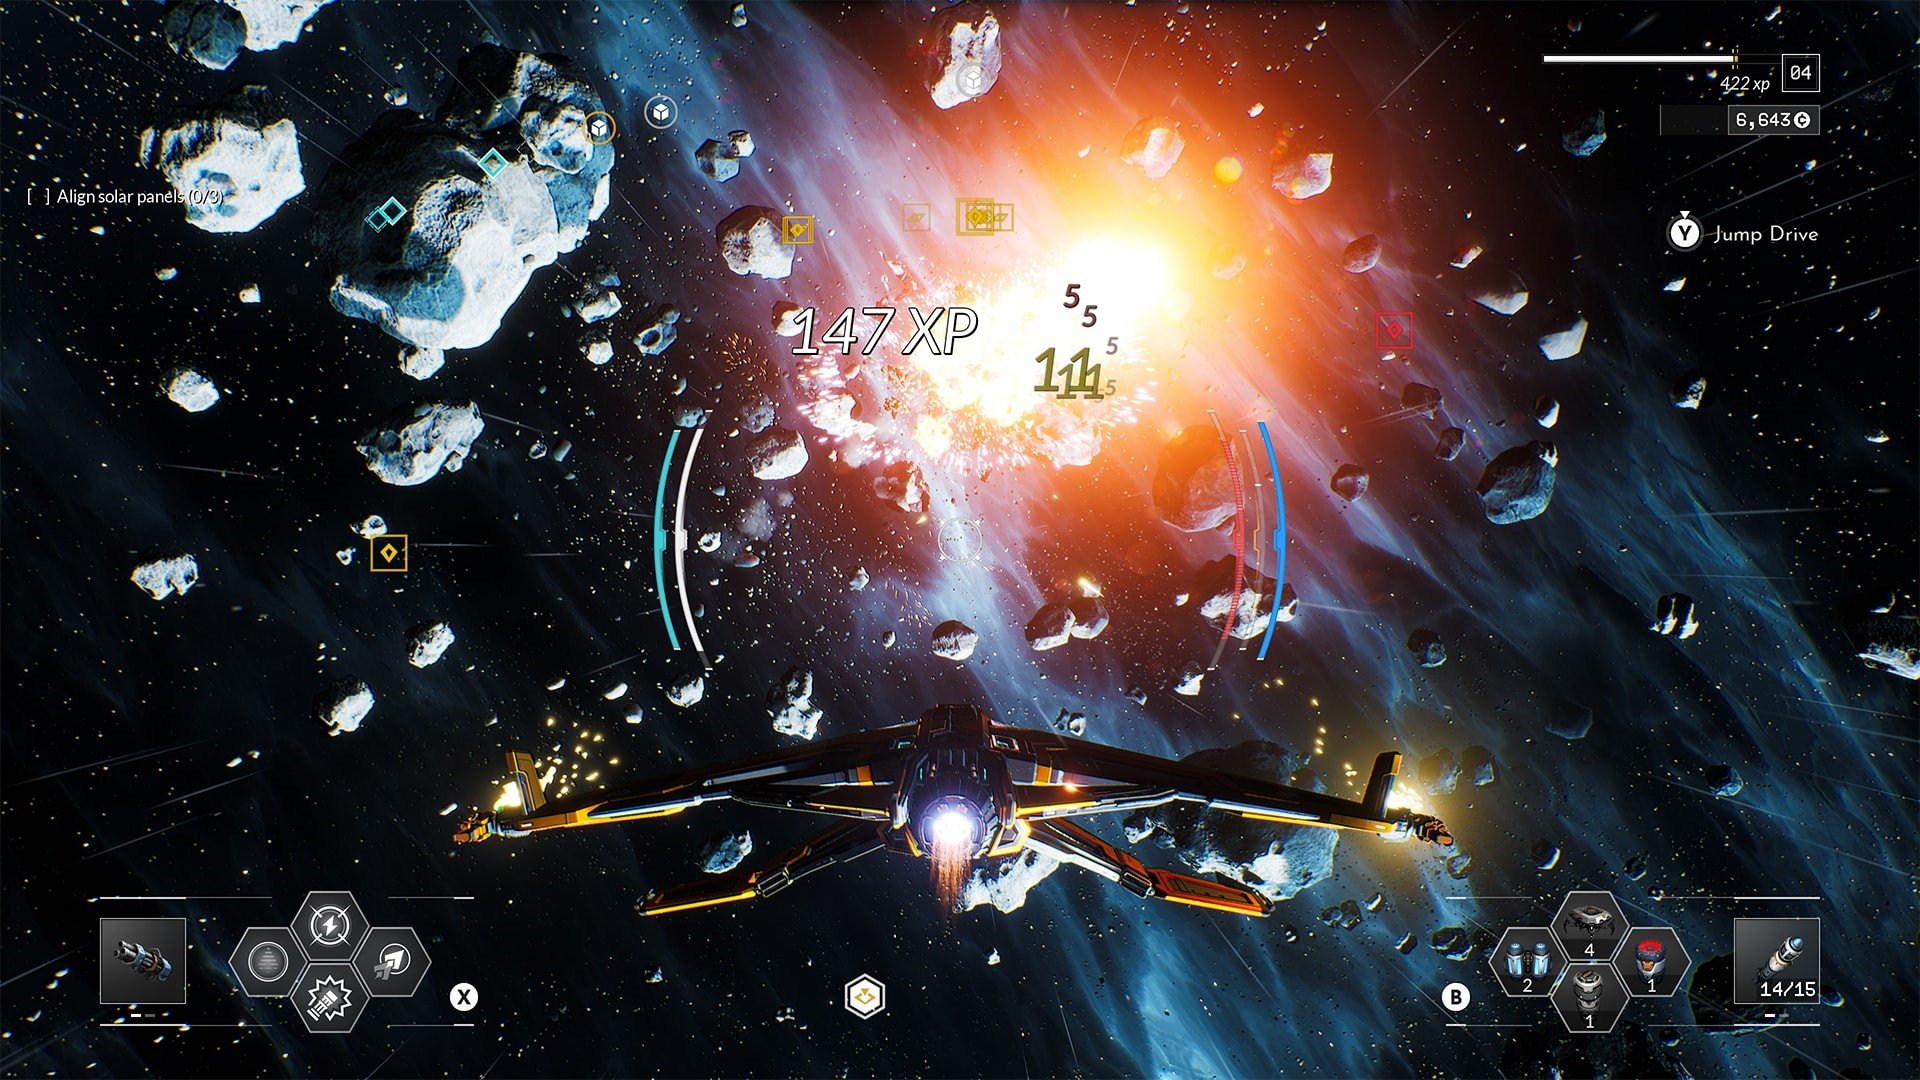 https://www.windowscentral.com/sites/wpcentral.com/files/styles/large/public/field/image/2019/08/everspace_2_hero.jpg?itok=TJ_pmSSG